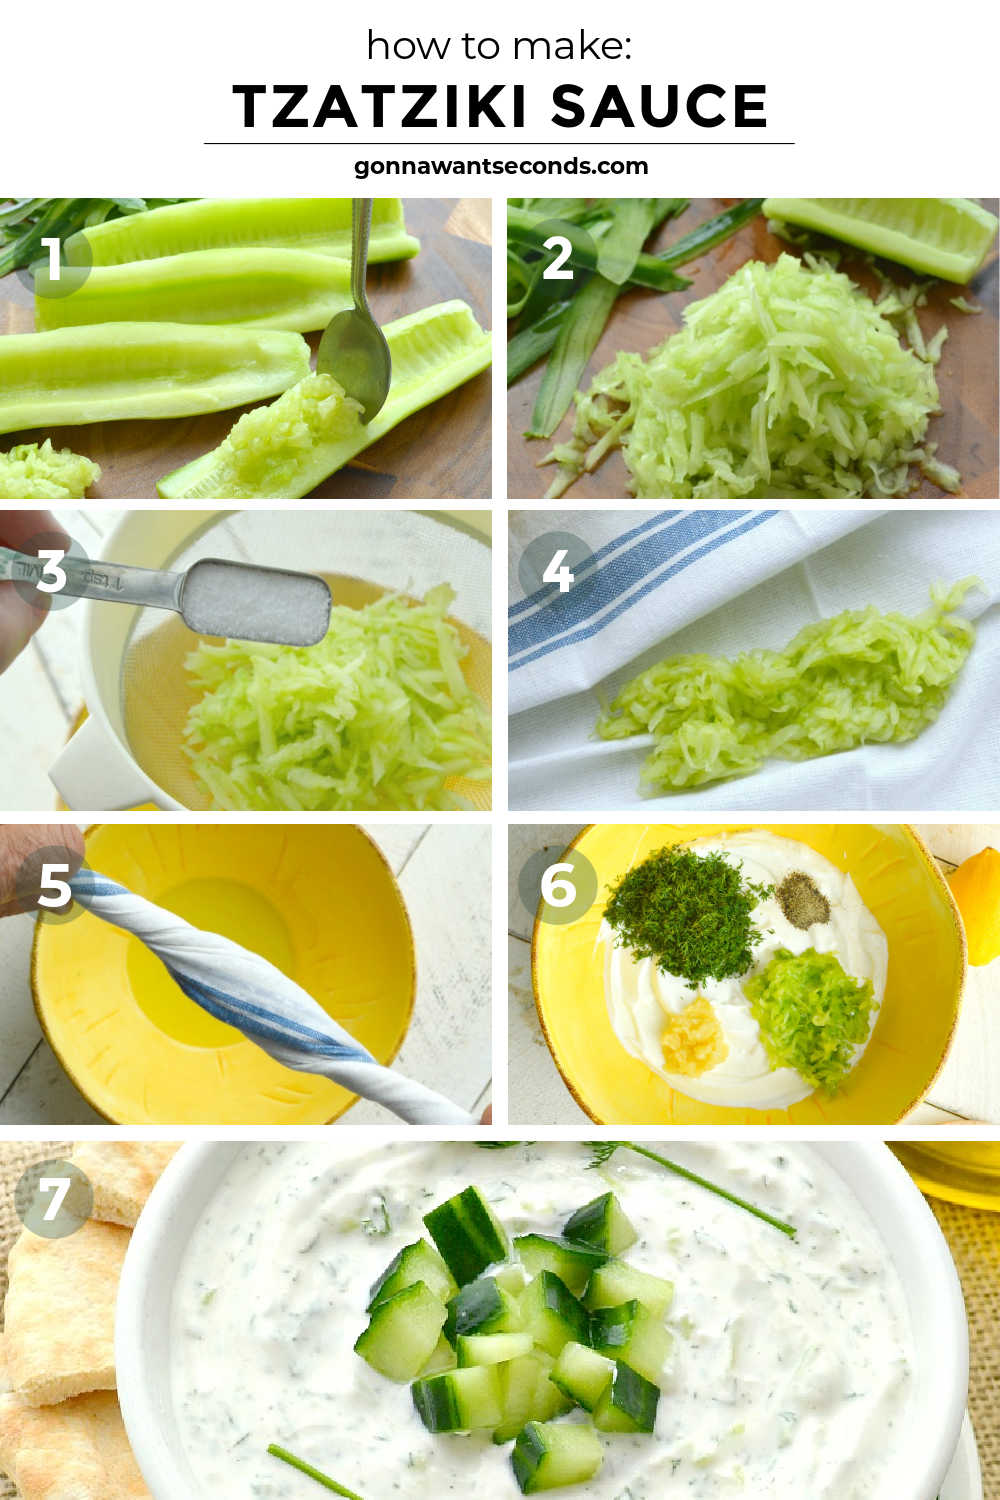 step by step how to make tzatziki sauce